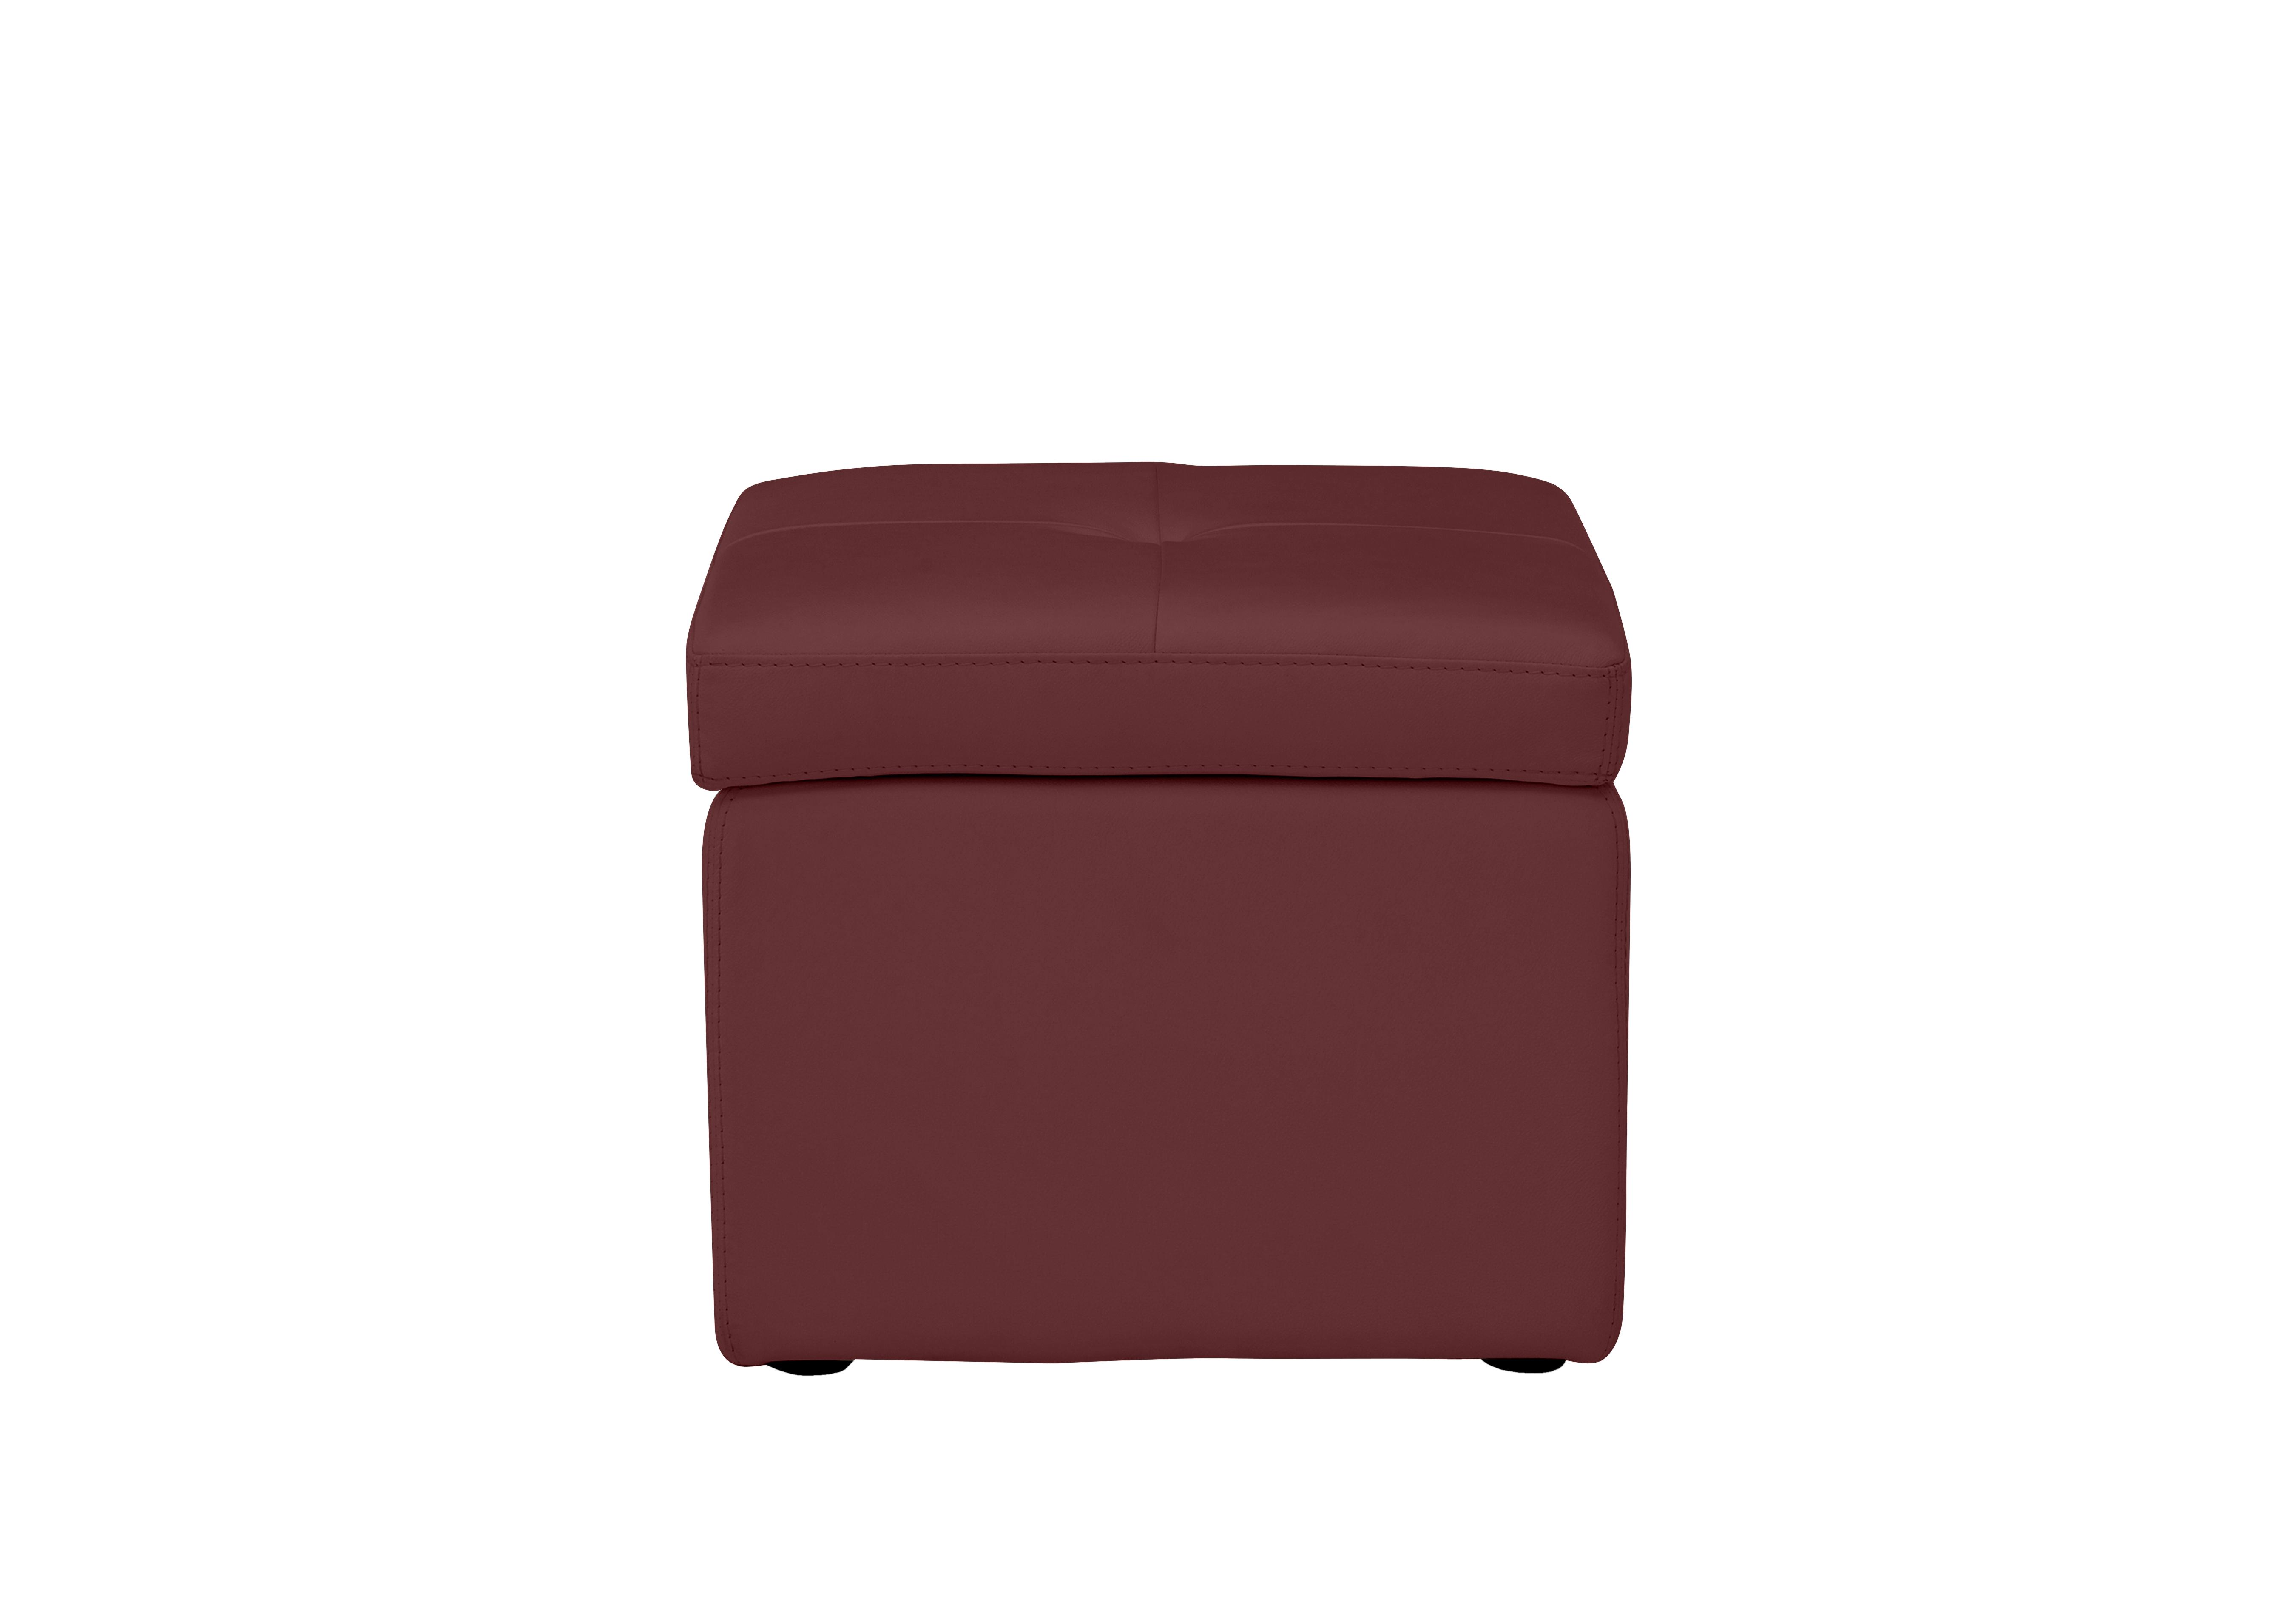 Easy Tray Leather Storage Footstool in Bv-035c Deep Red on Furniture Village